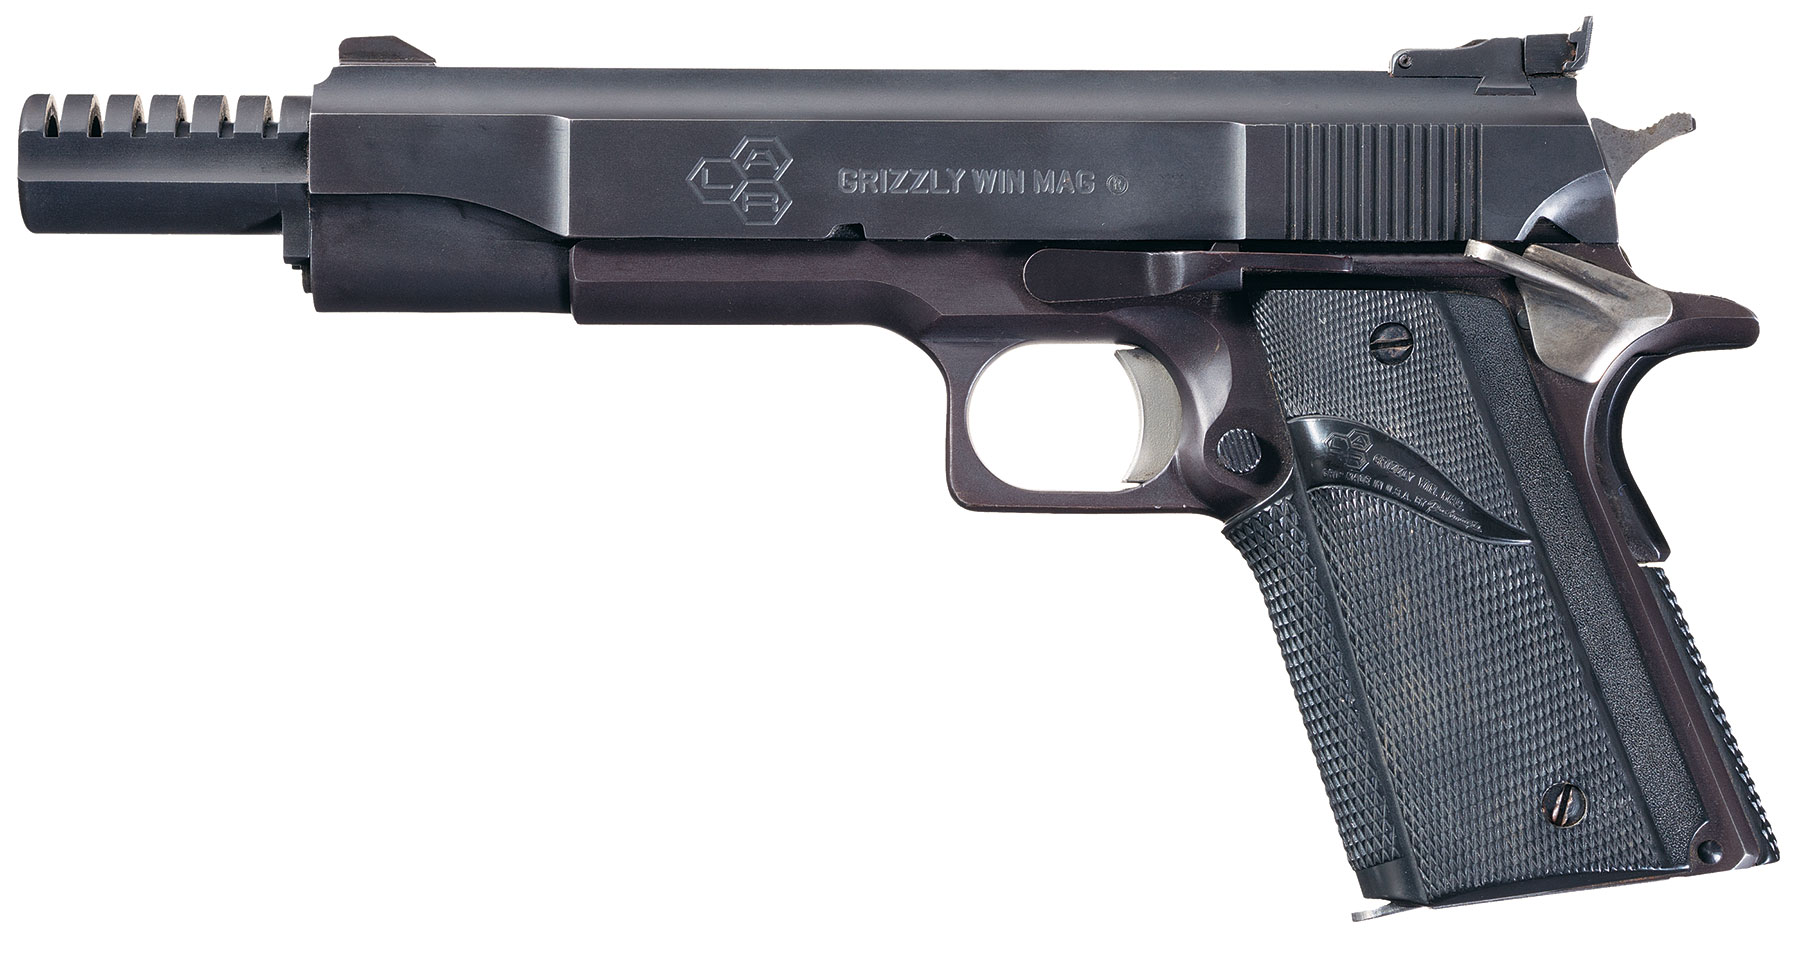 L.A.R. Grizzly Mark I Win Mag Semi-Automatic Pistol with Case | Rock